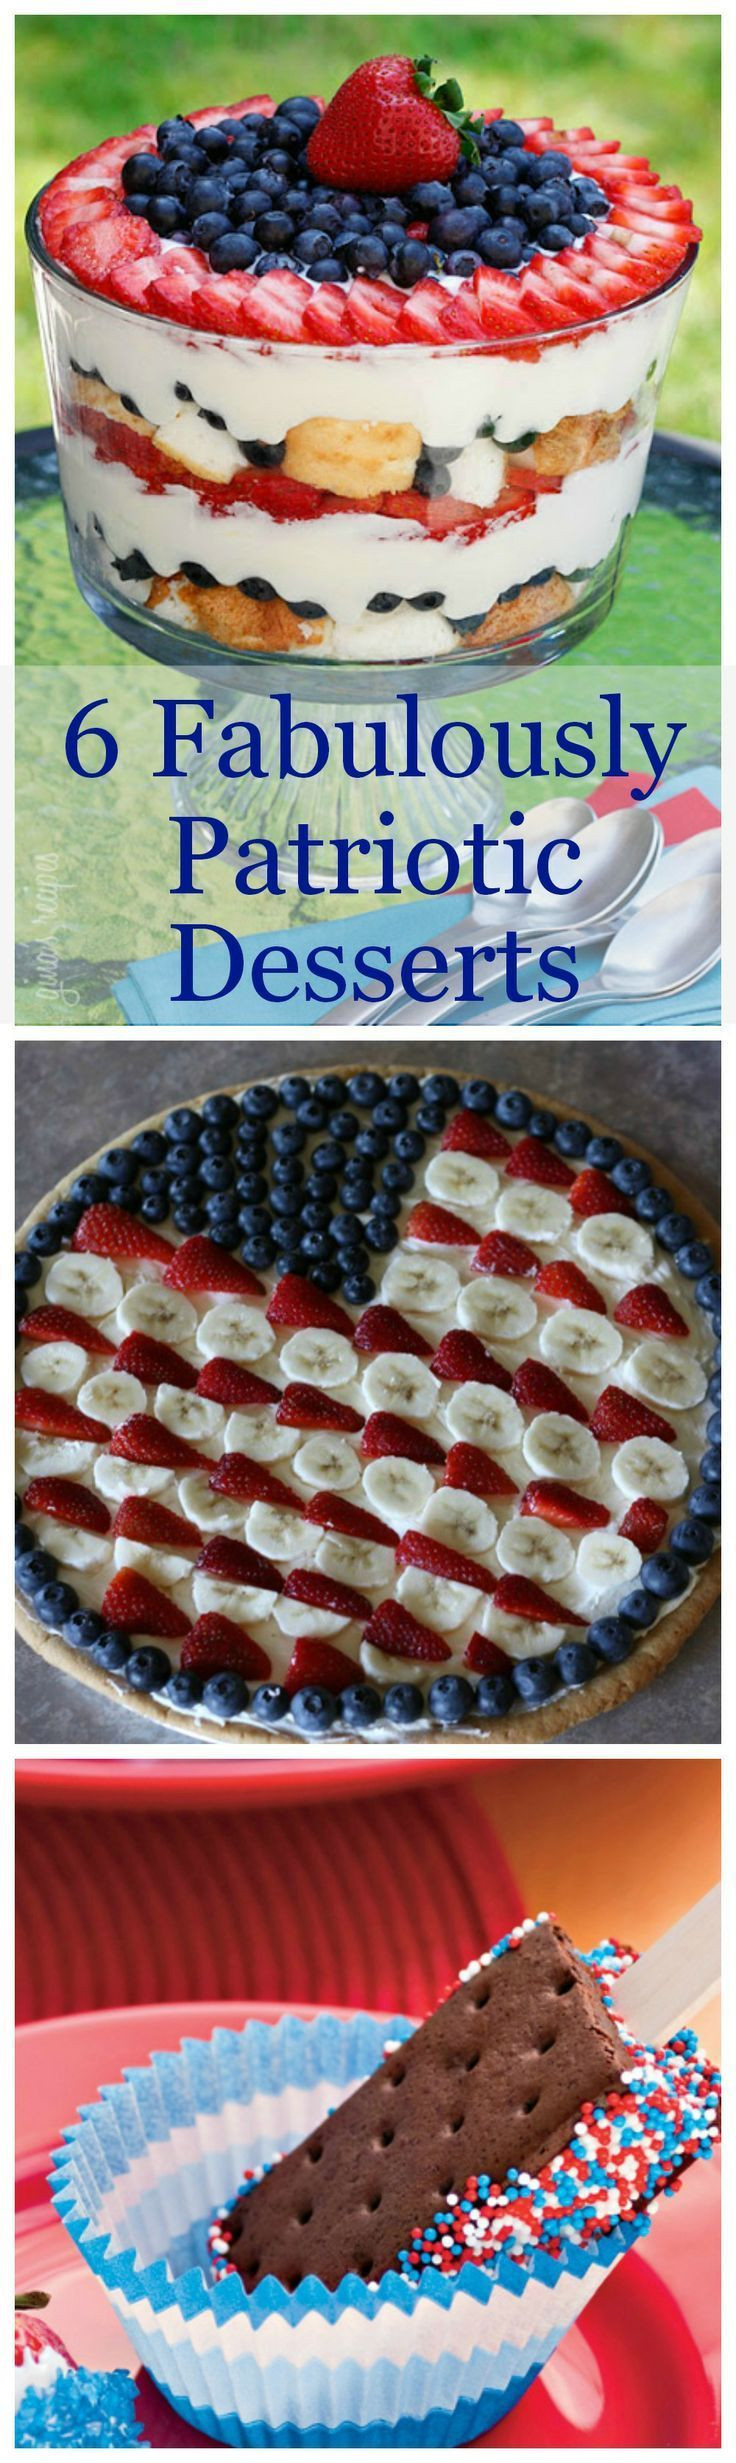 Fun Fourth Of July Desserts
 10 best images about 4th of July on Pinterest